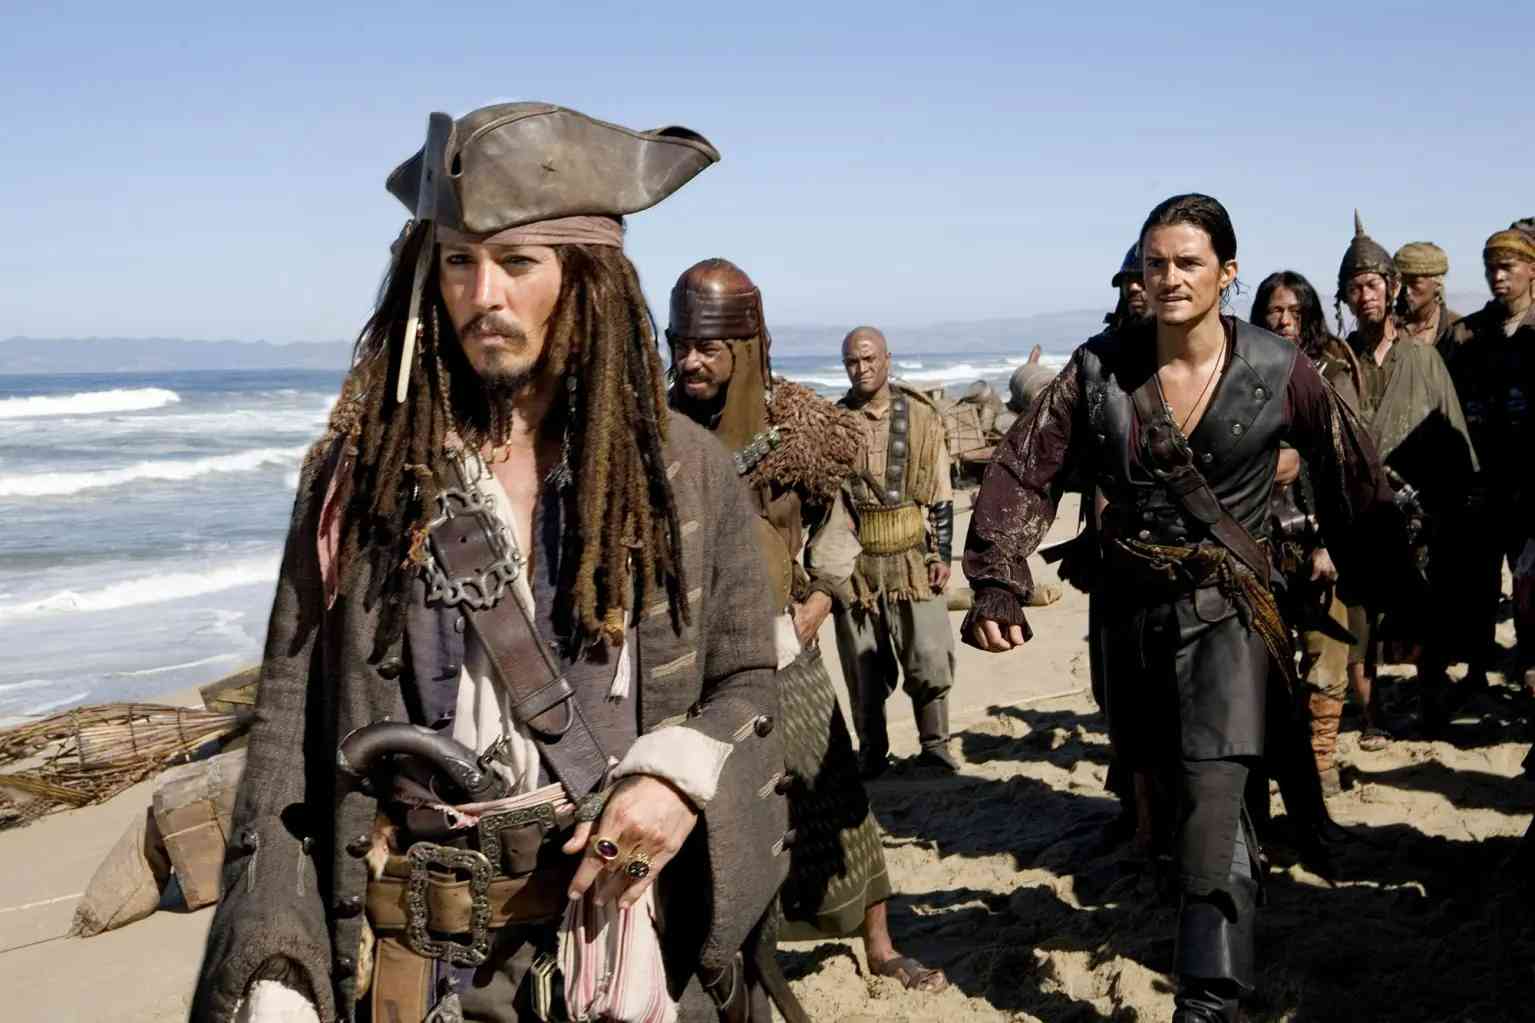 Pirates-of-the-Caribbean:-At-World's-End-in-India